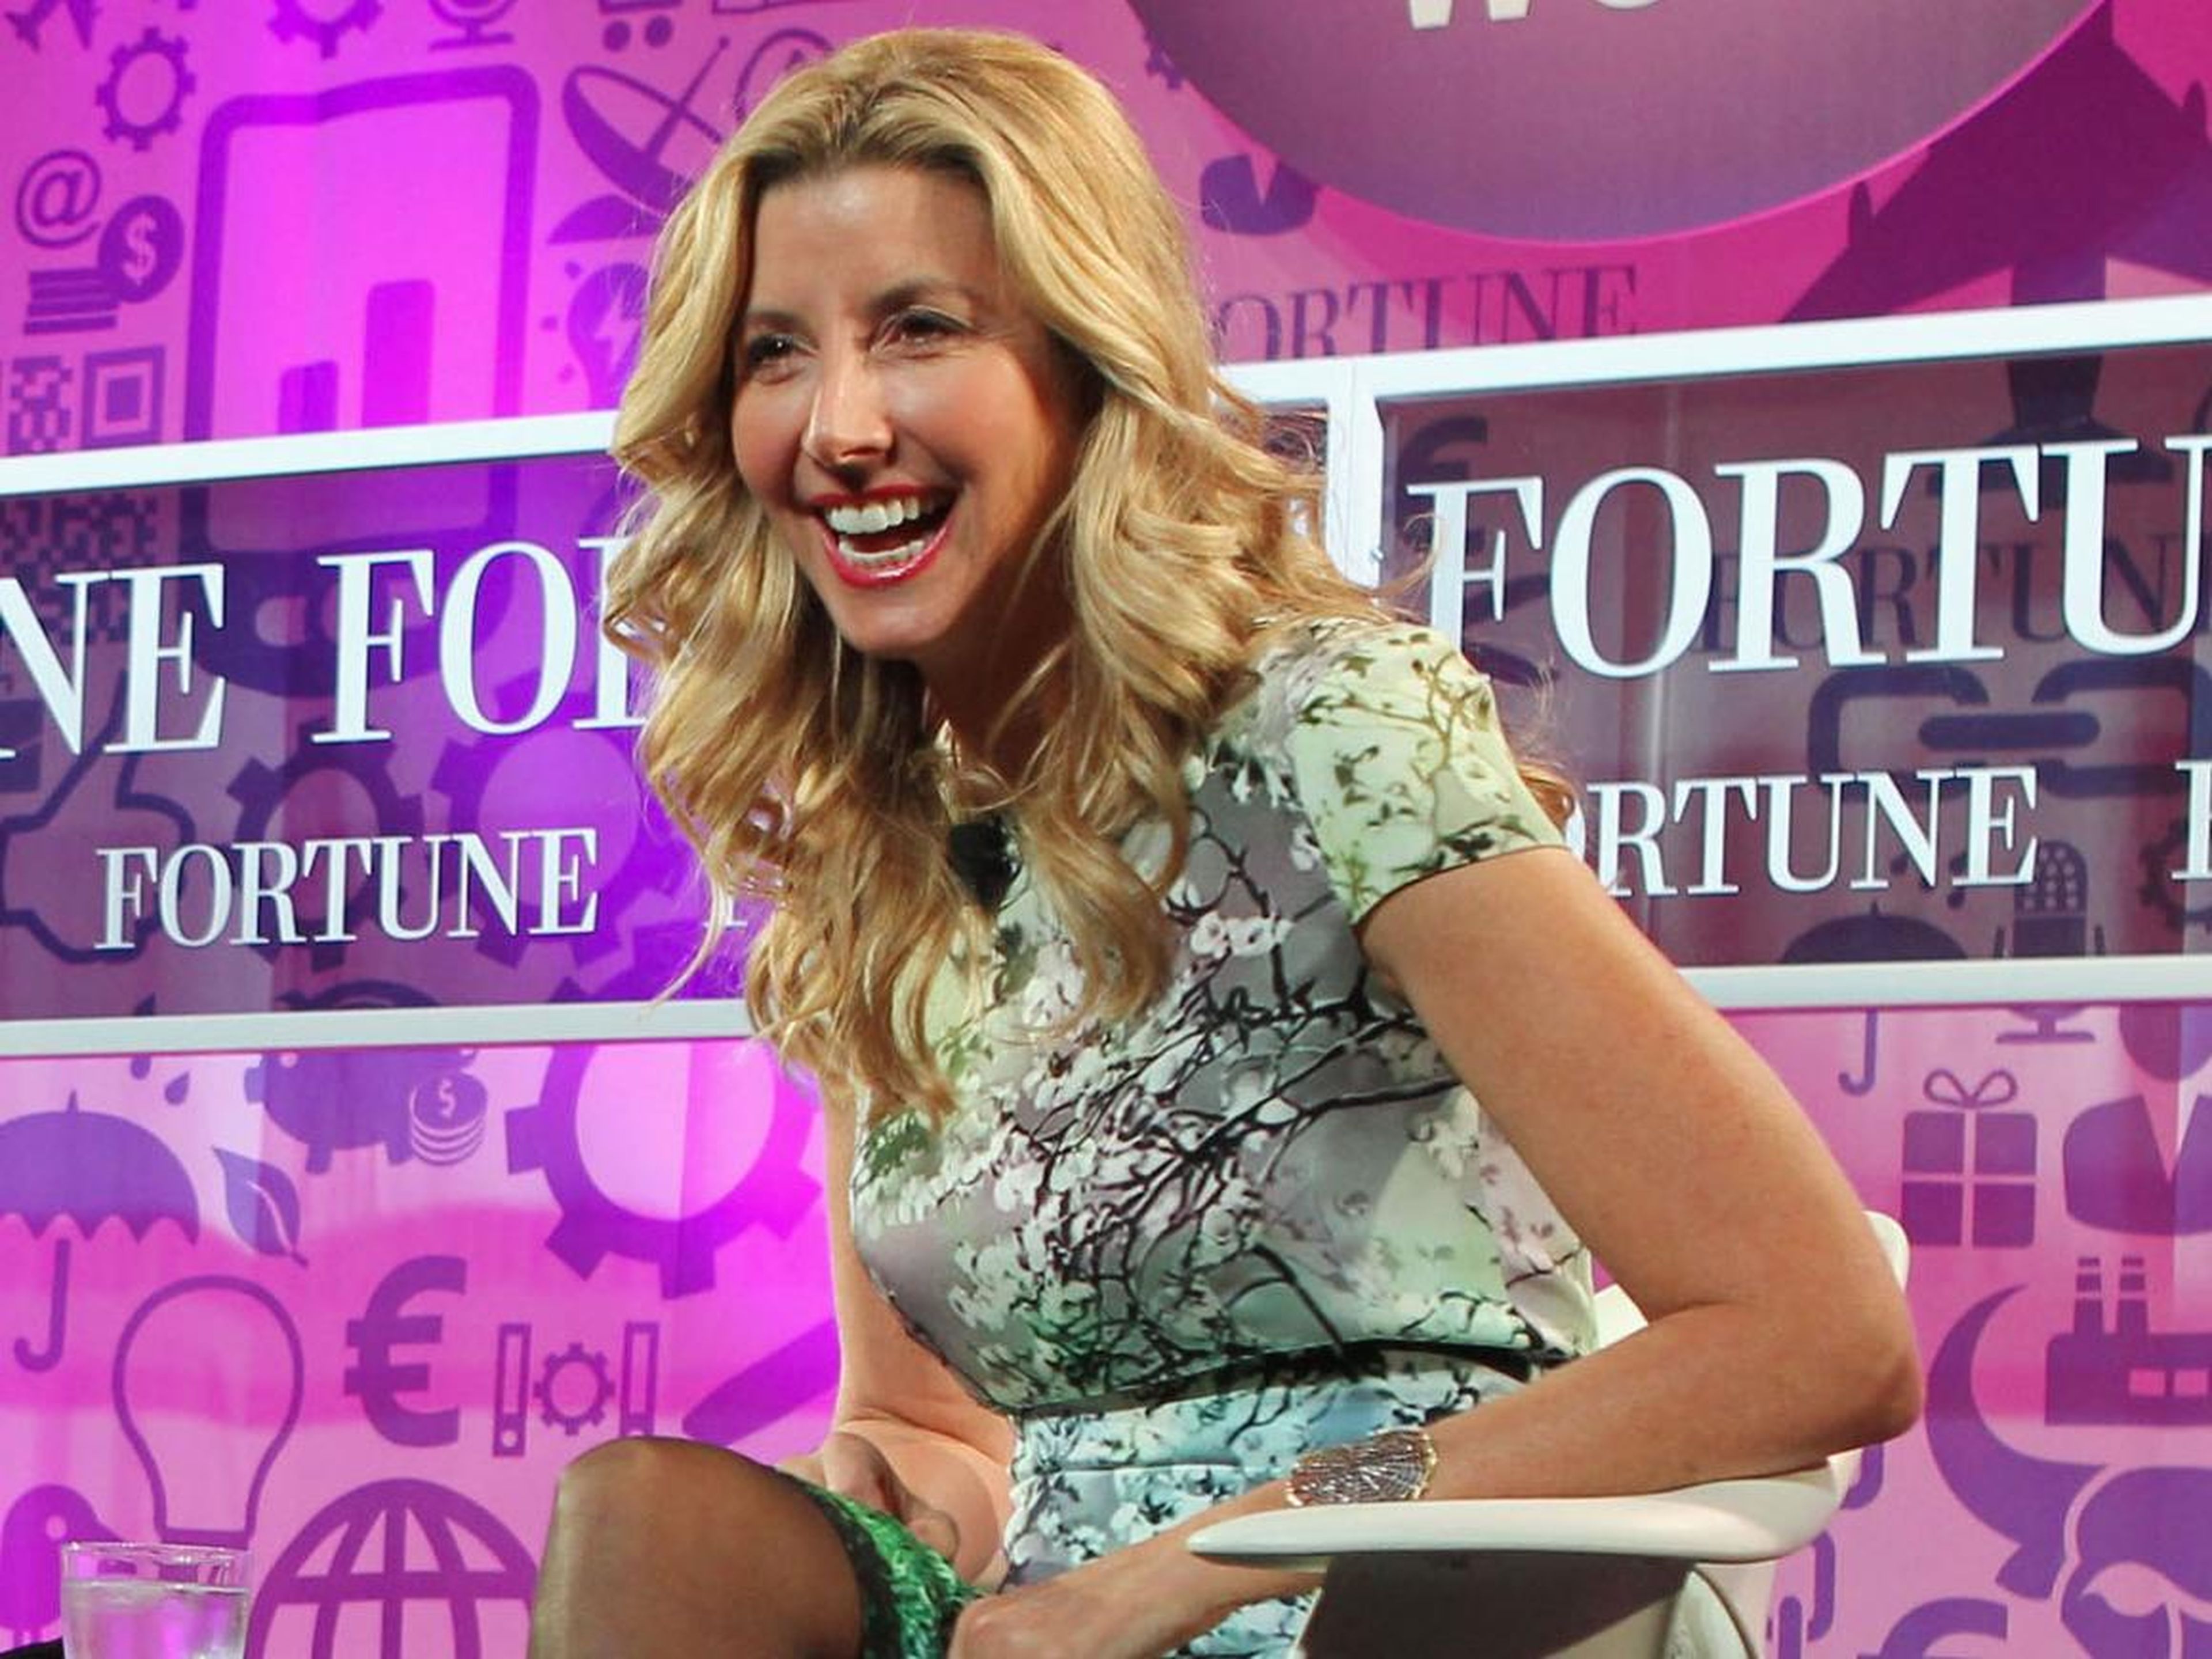 "Money makes you more of who you already are." — Sara Blakely, founder of Spanx